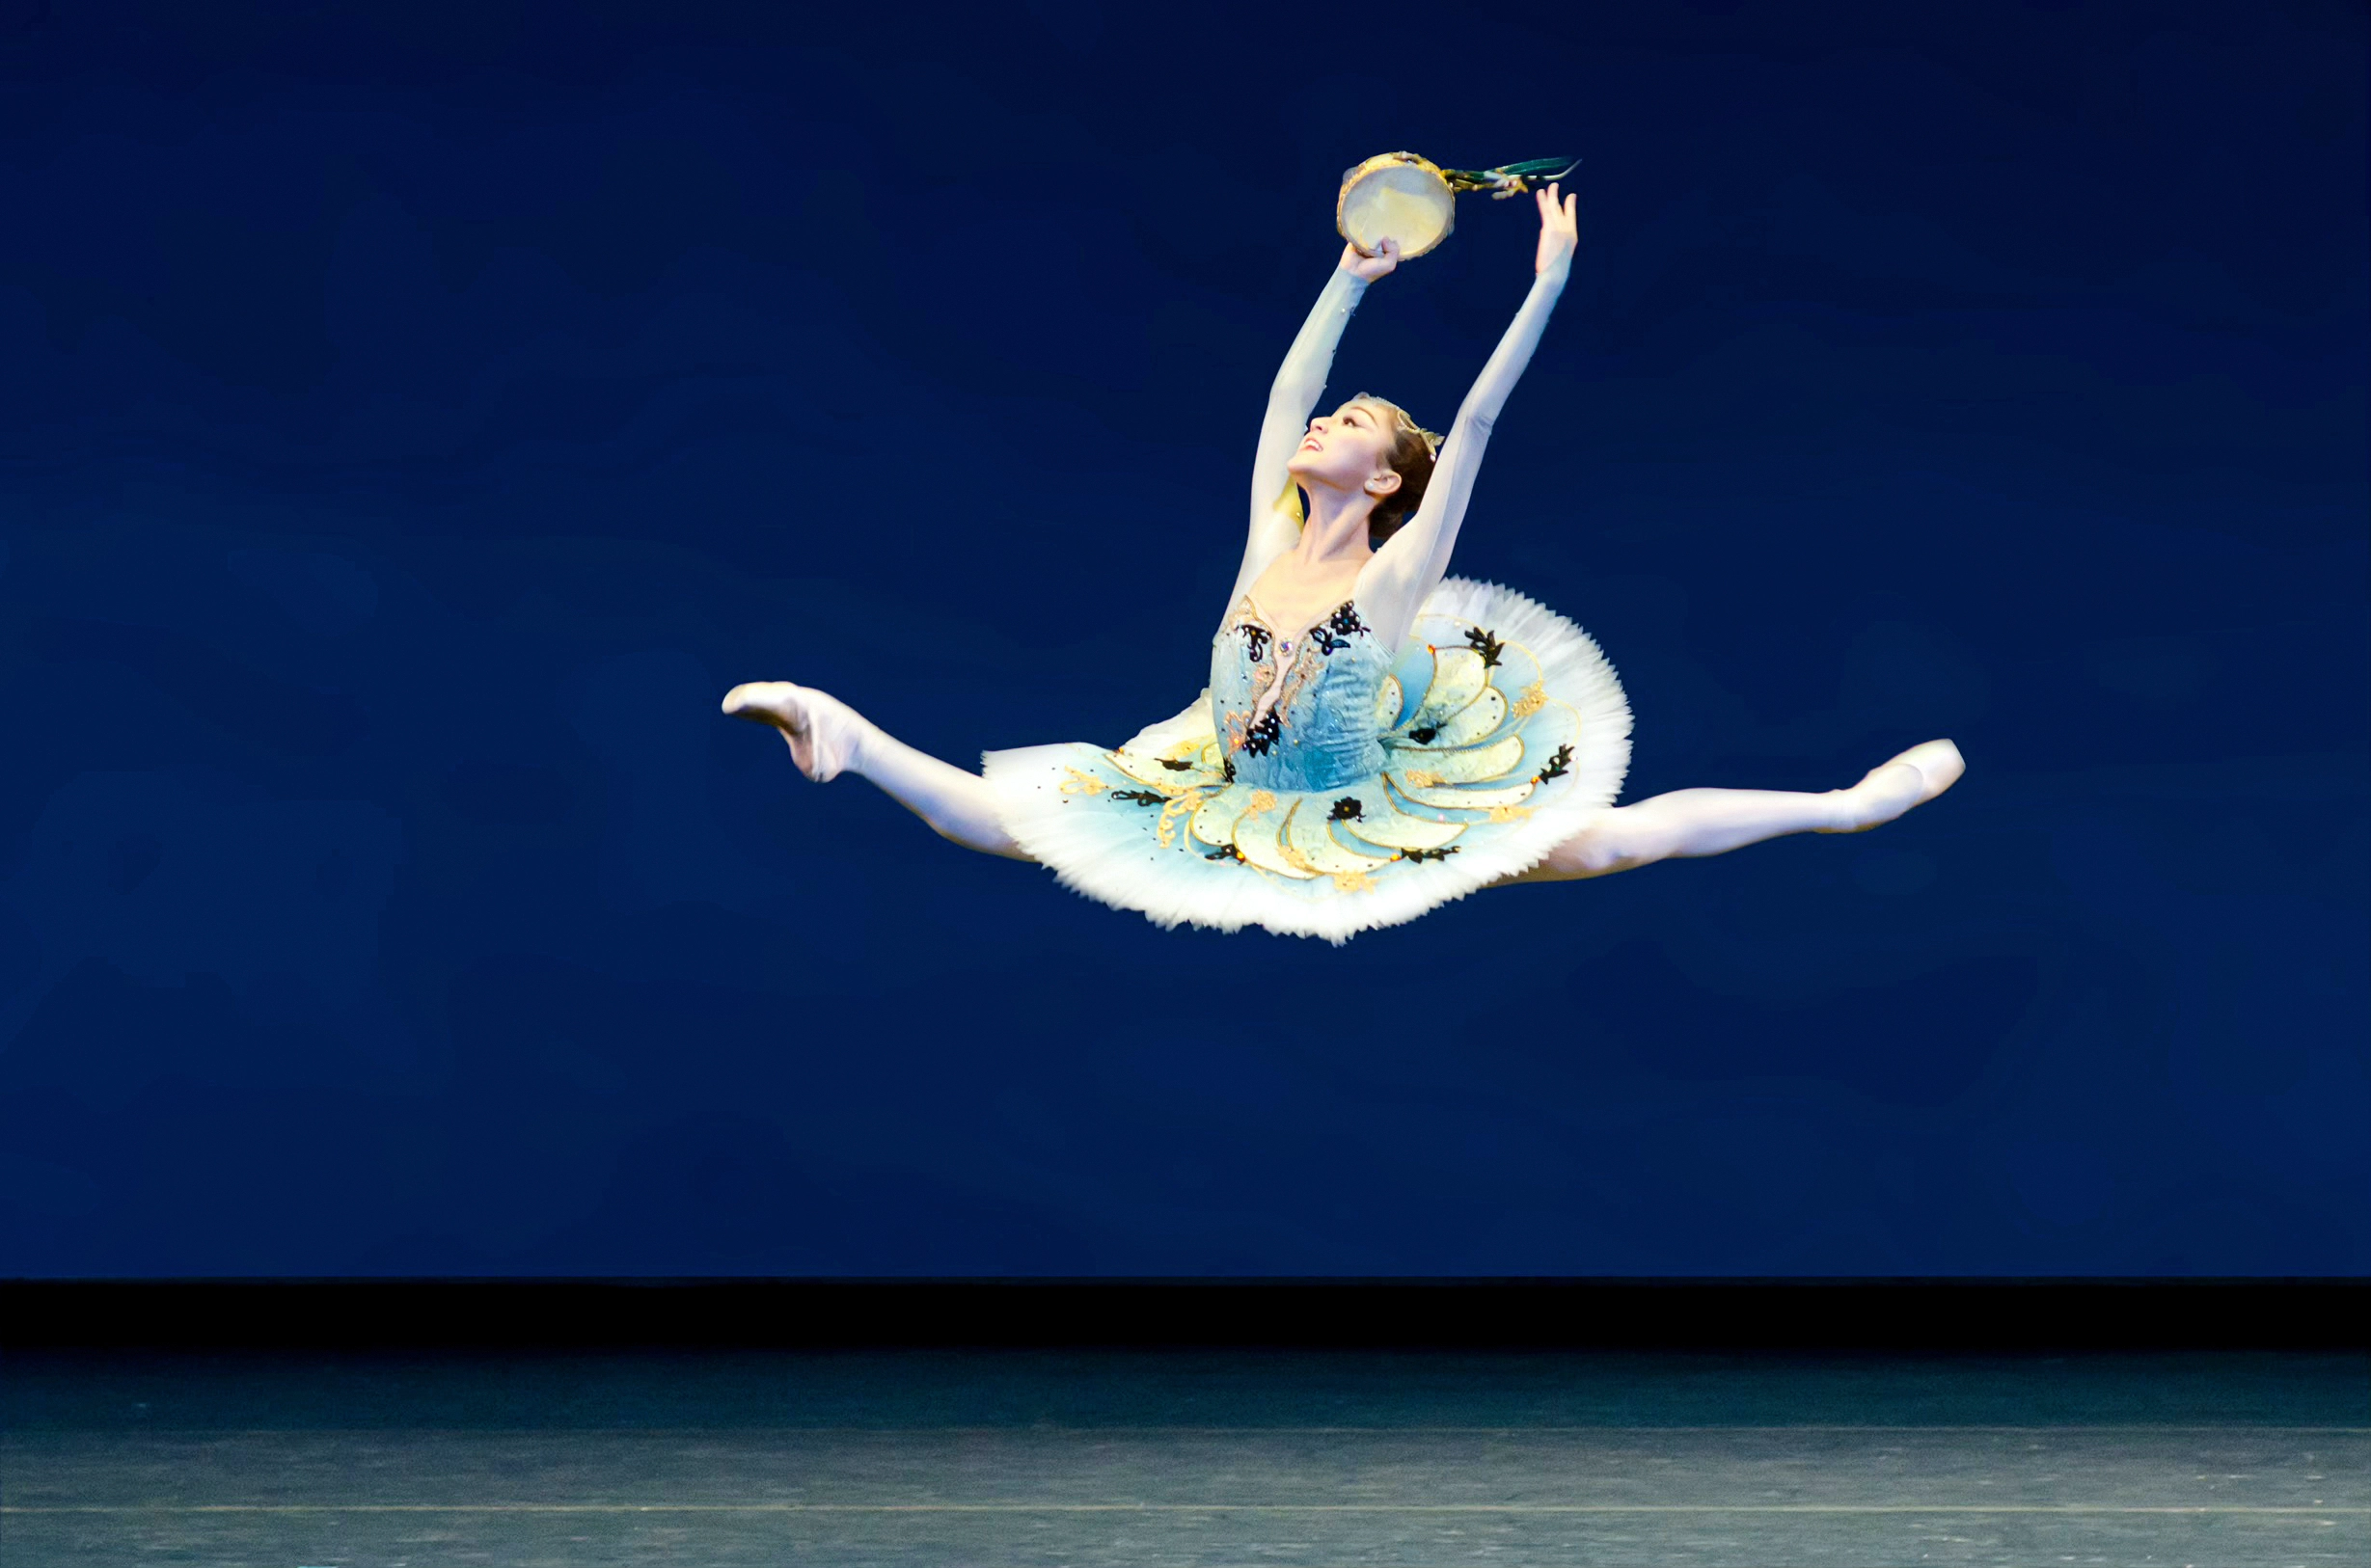 Miko Fogarty does a large saut de chat onstage during a ballet competition. She lifts her arms in high fifth and holds a tambourine in her right hand, and looks up with a triumphant smile. She wears a classical tutu with a blue bodice and blue and white ombre tutu with pastel yellow, green and dark blue trim. She also wears pink tights and pink pointe shoes.